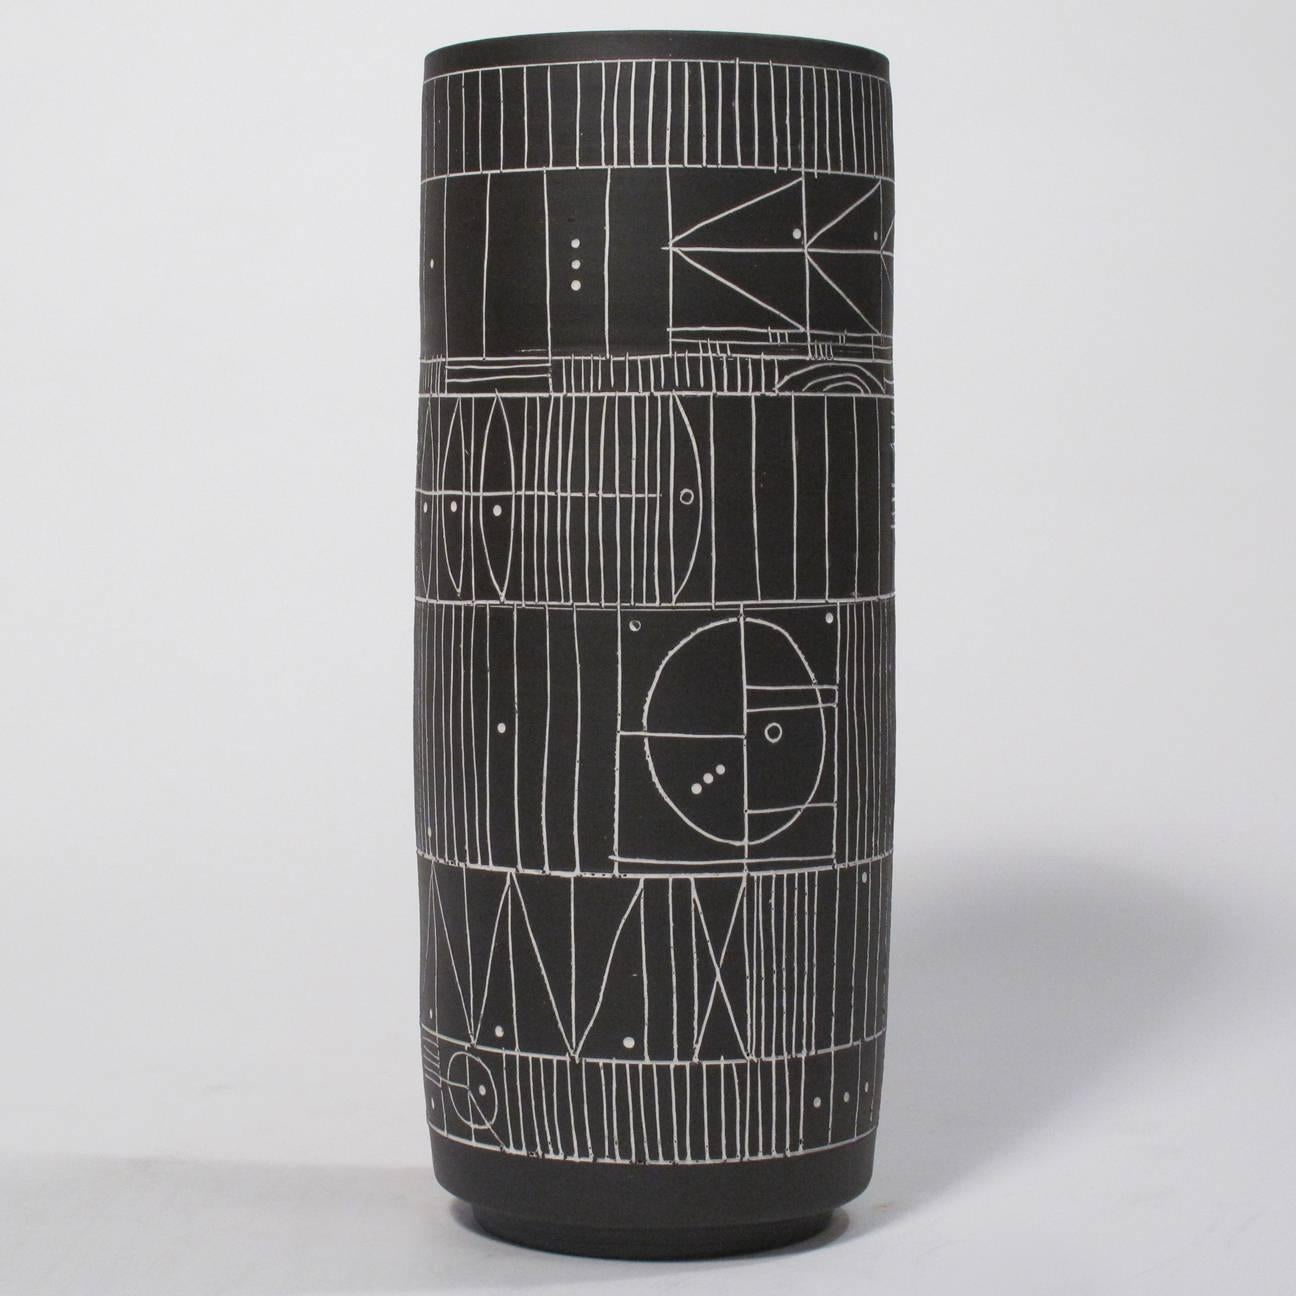 A trio of incised black and white “Scribe” ceramic cylinder vases by LA artist Heather Rosenman. Individually carved, so no two are alike. Sealed on the interior and thus suitable for functional use. Signed by the artist. Can be purchased